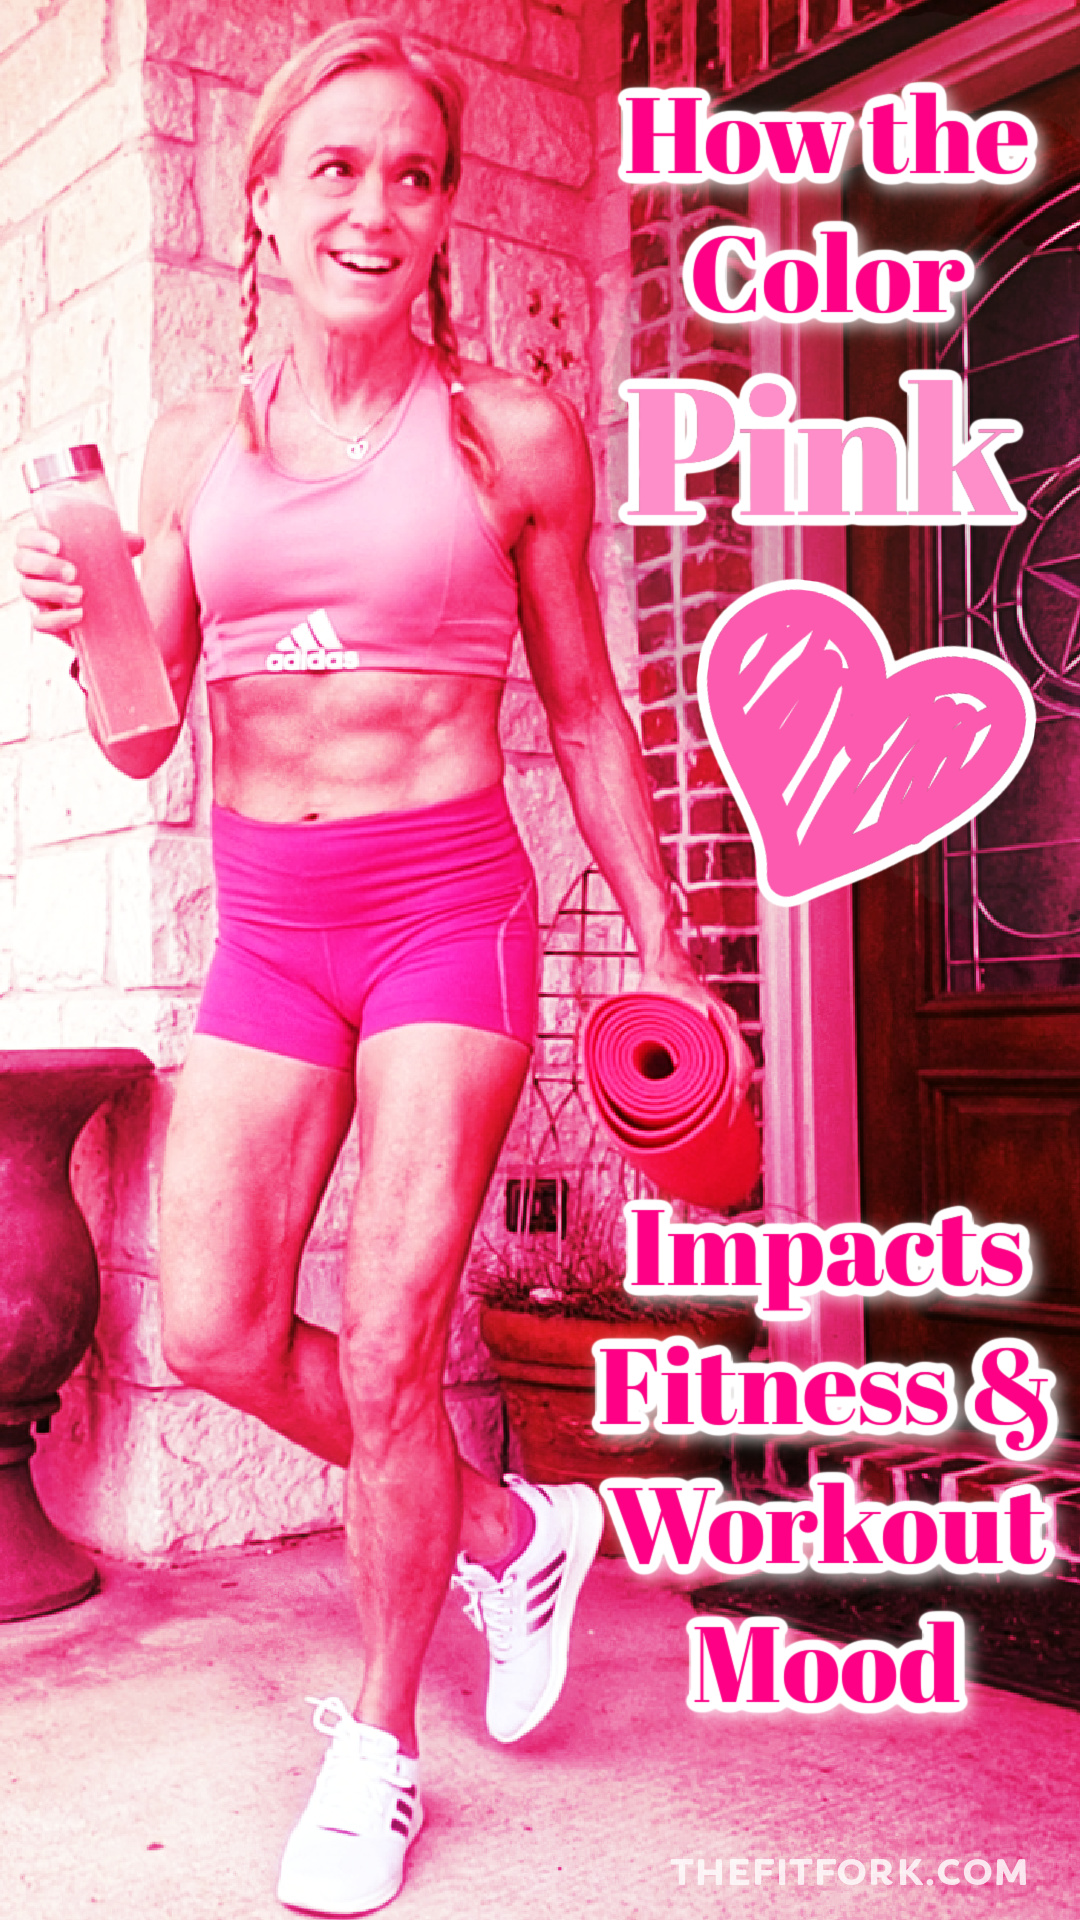 https://thefitfork.com/wp-content/uploads/2021/04/How-the-Color-Pink-impacts-Fitness-Workout-Mood-pin.jpg